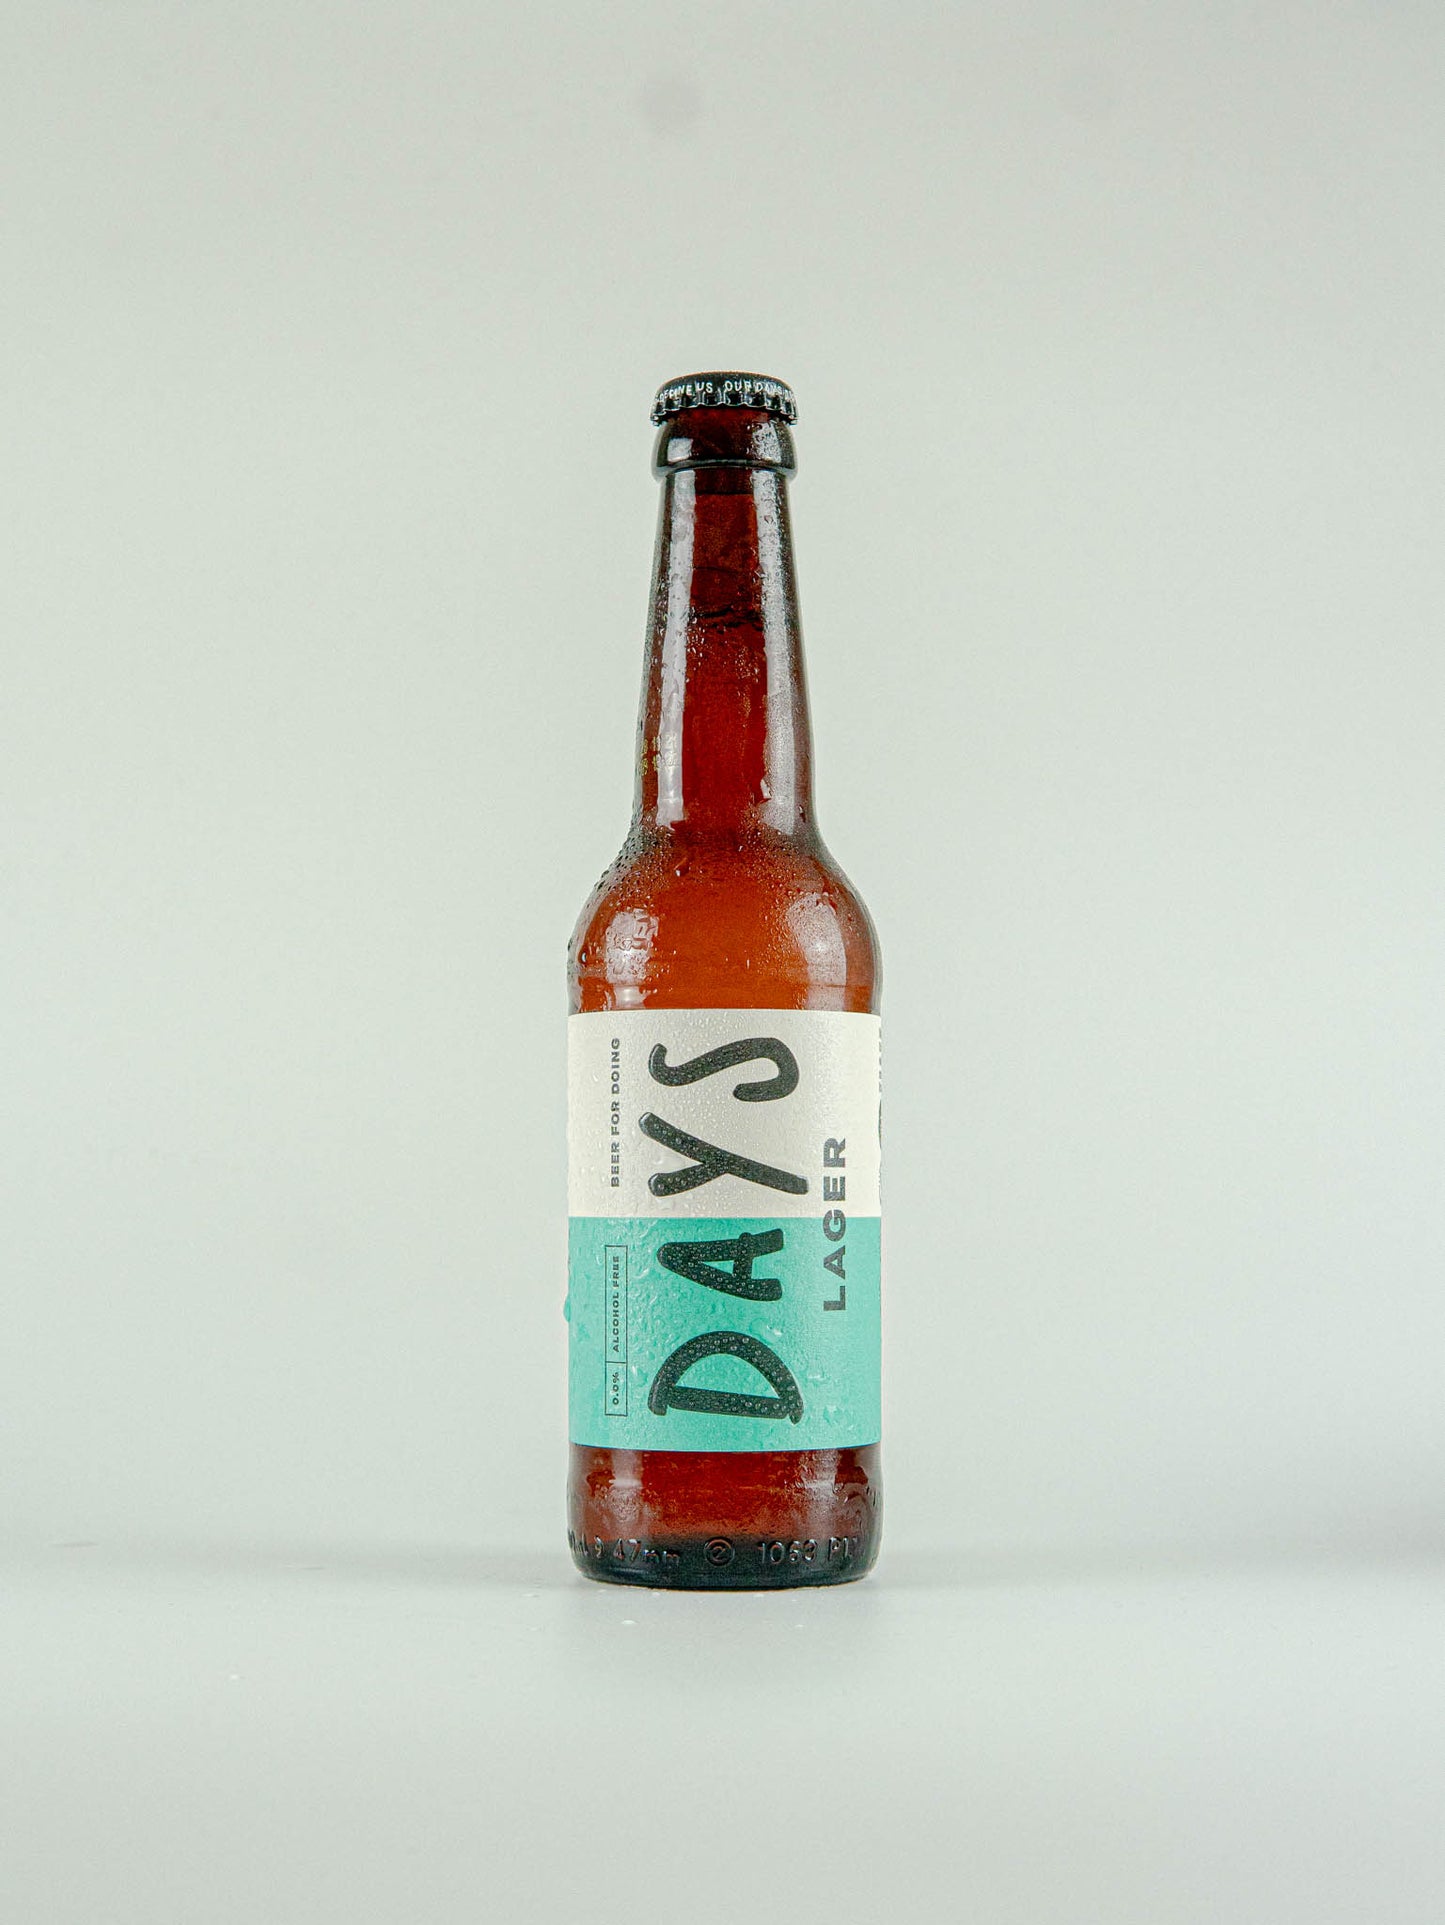 Days Brewing Alcohol Free Lager 0.0% - 330ml